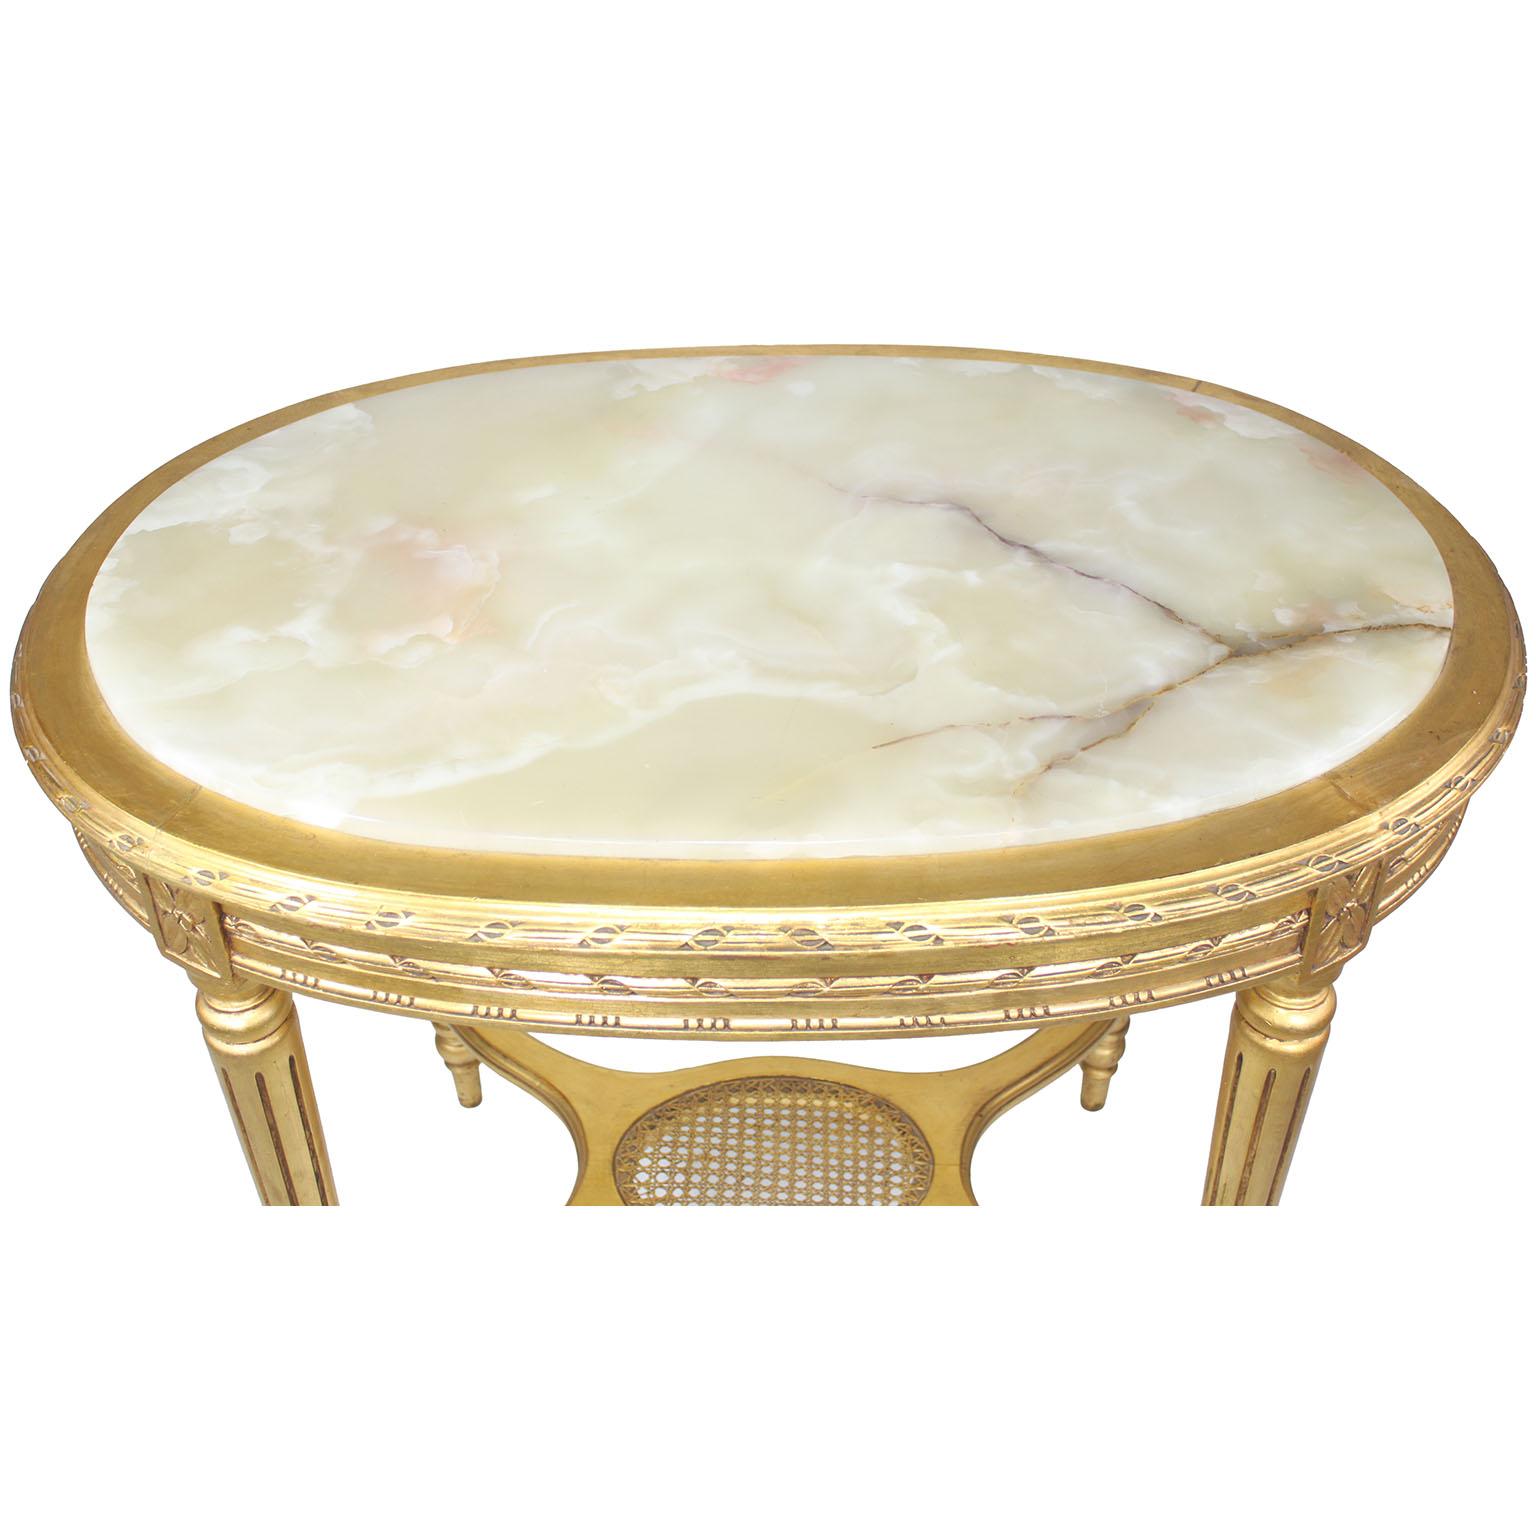 French Louis XVI Style Belle Époque Oval Giltwood Carved Center Table w/Onyx Top For Sale 1